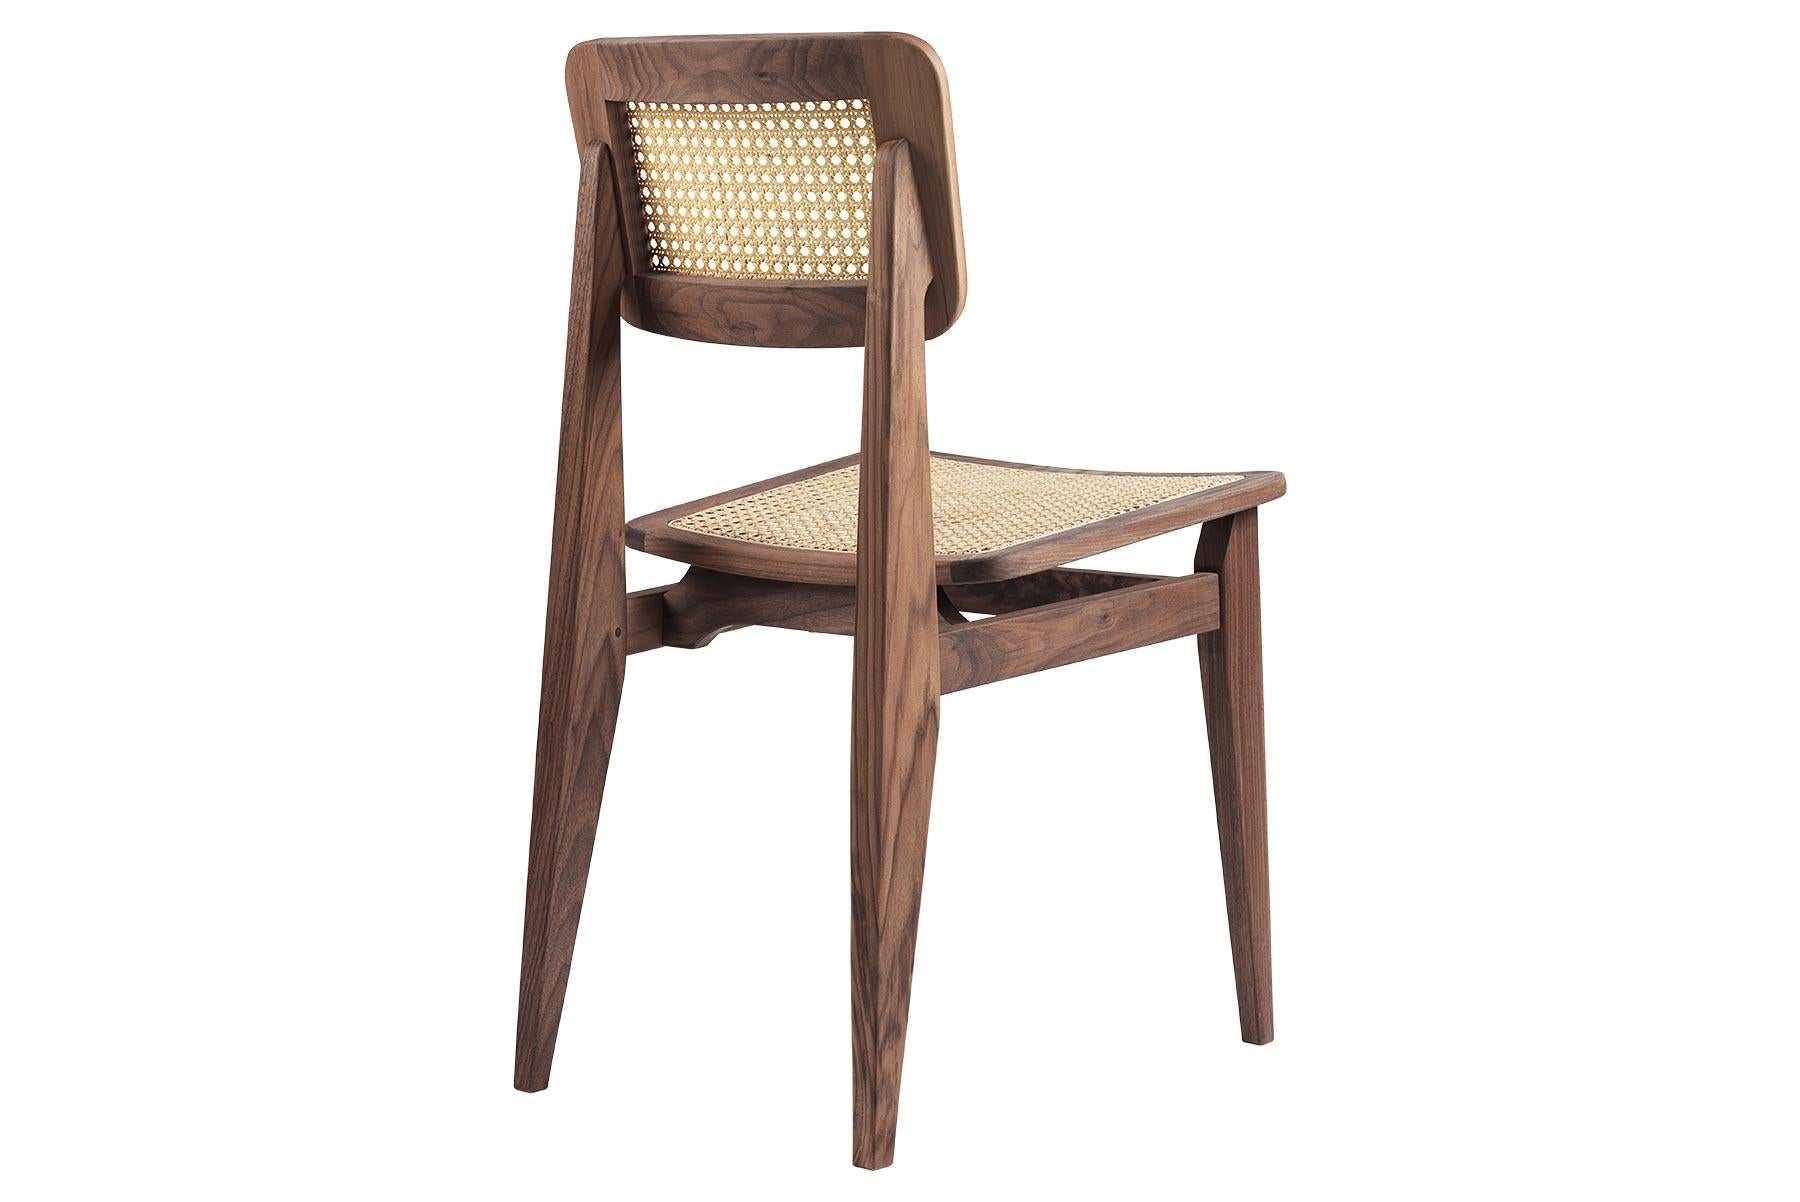 C-Chair Dining Chair, French Cane, Walnut In Excellent Condition For Sale In Berkeley, CA